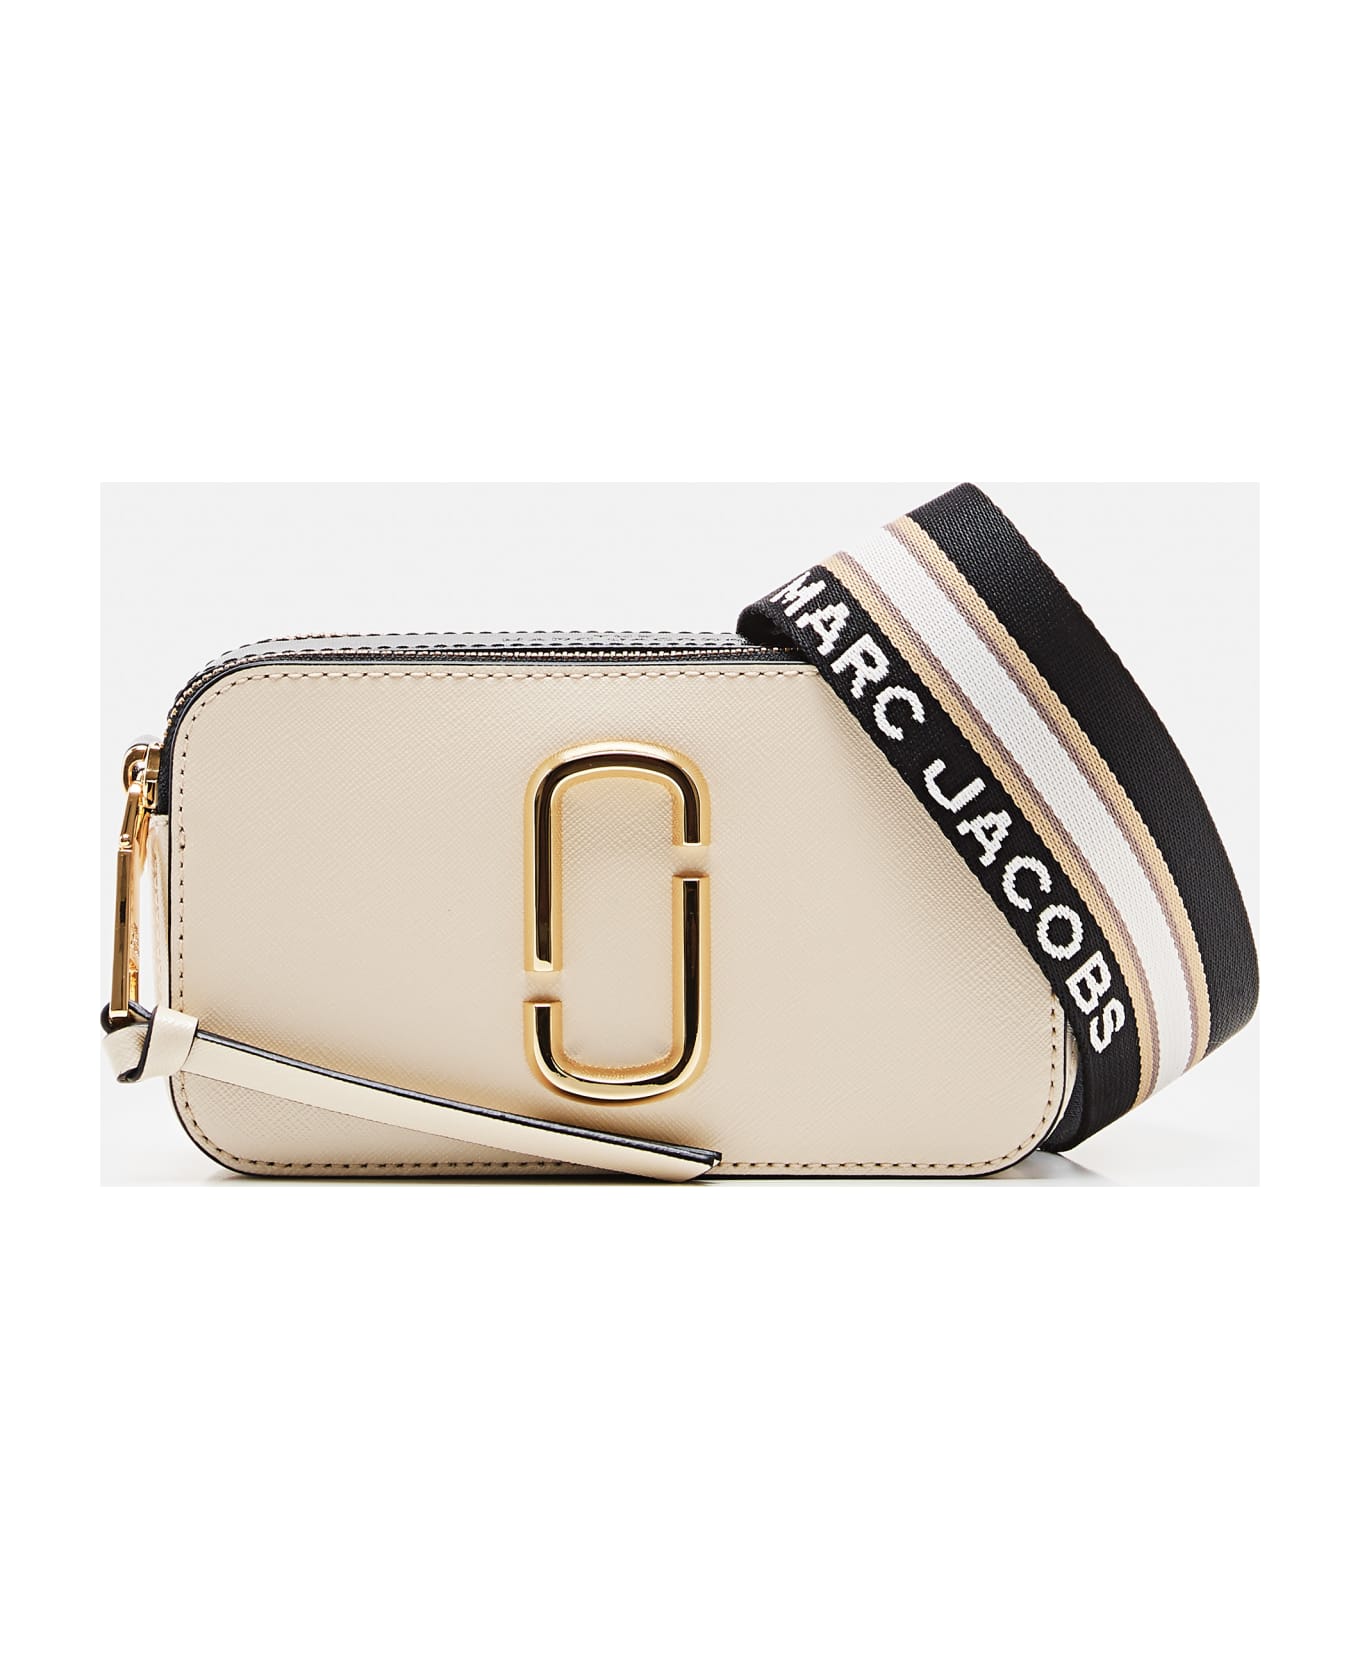 The Marc Jacobs Women's Snapshot Crossbody Bag, New Coconut Multi, One Size